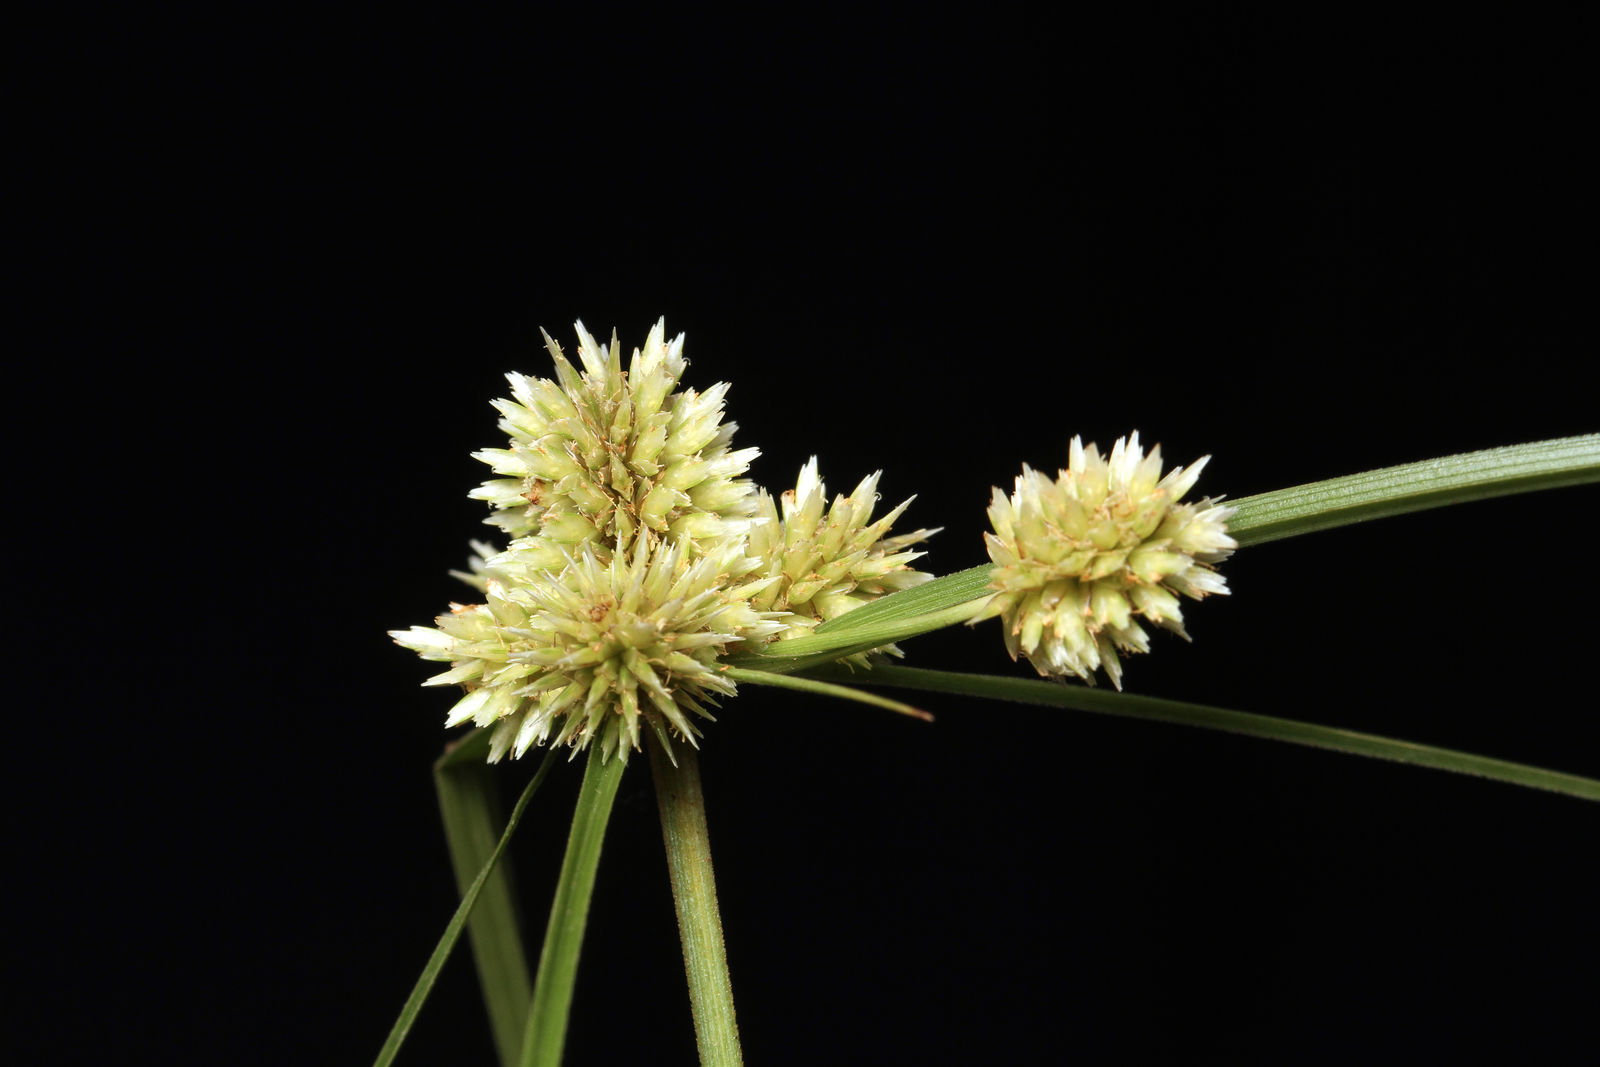 Cyperus ischnos Schltdl.  Colombian Plants made accessible